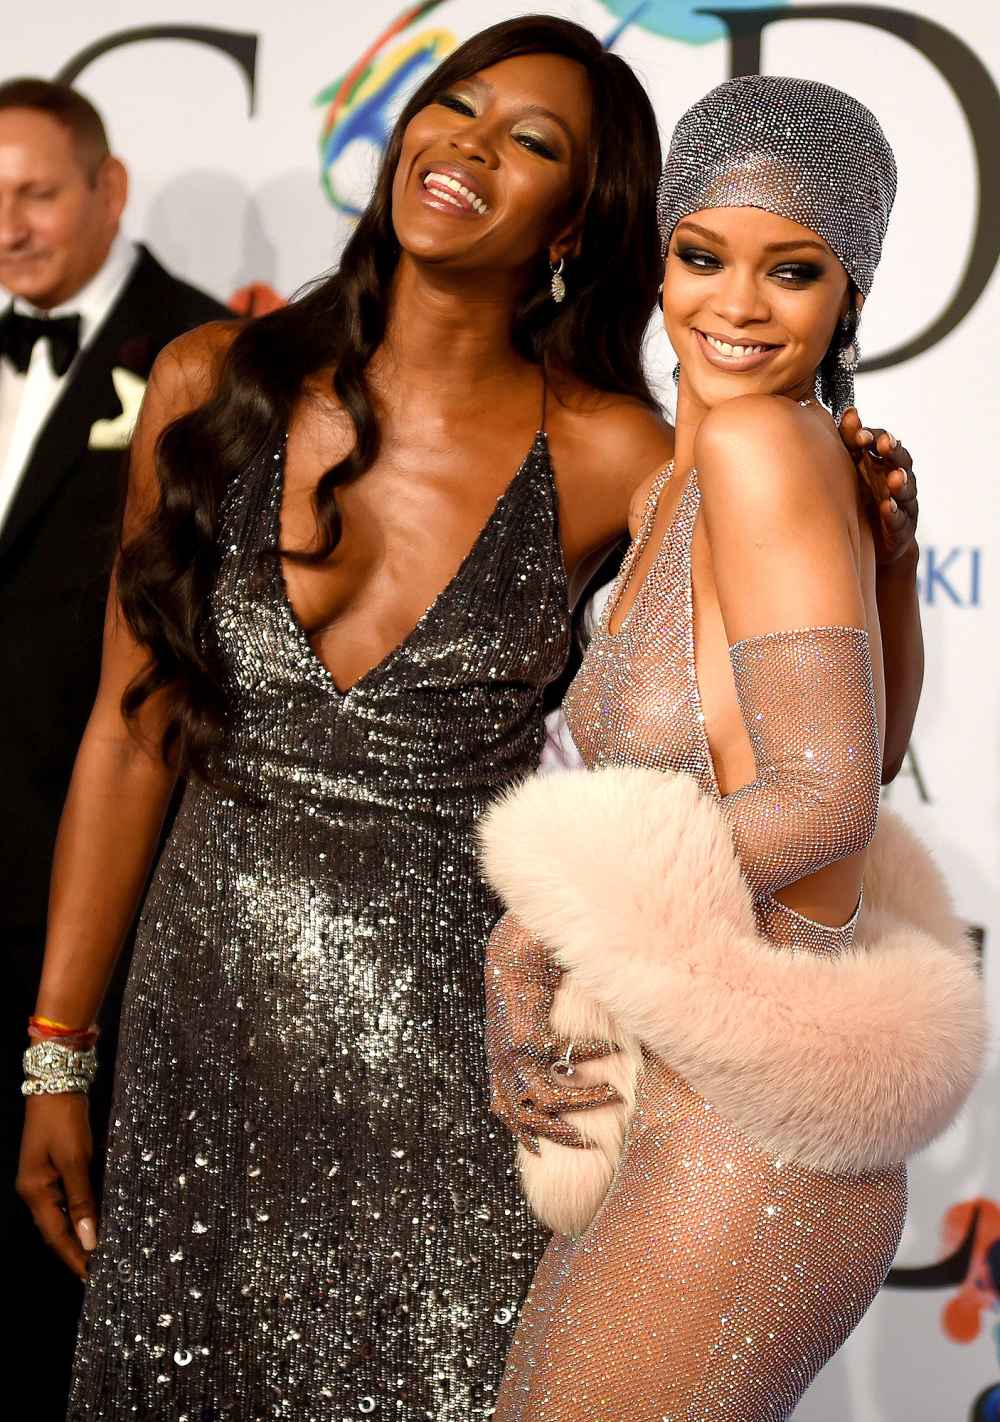 Naomi Campbell and Rihanna attend the 2014 Council of Designer of America Awards (CFDA)at Alice Tully Hall at the Lincoln Center June 2, 2014 in New York City.